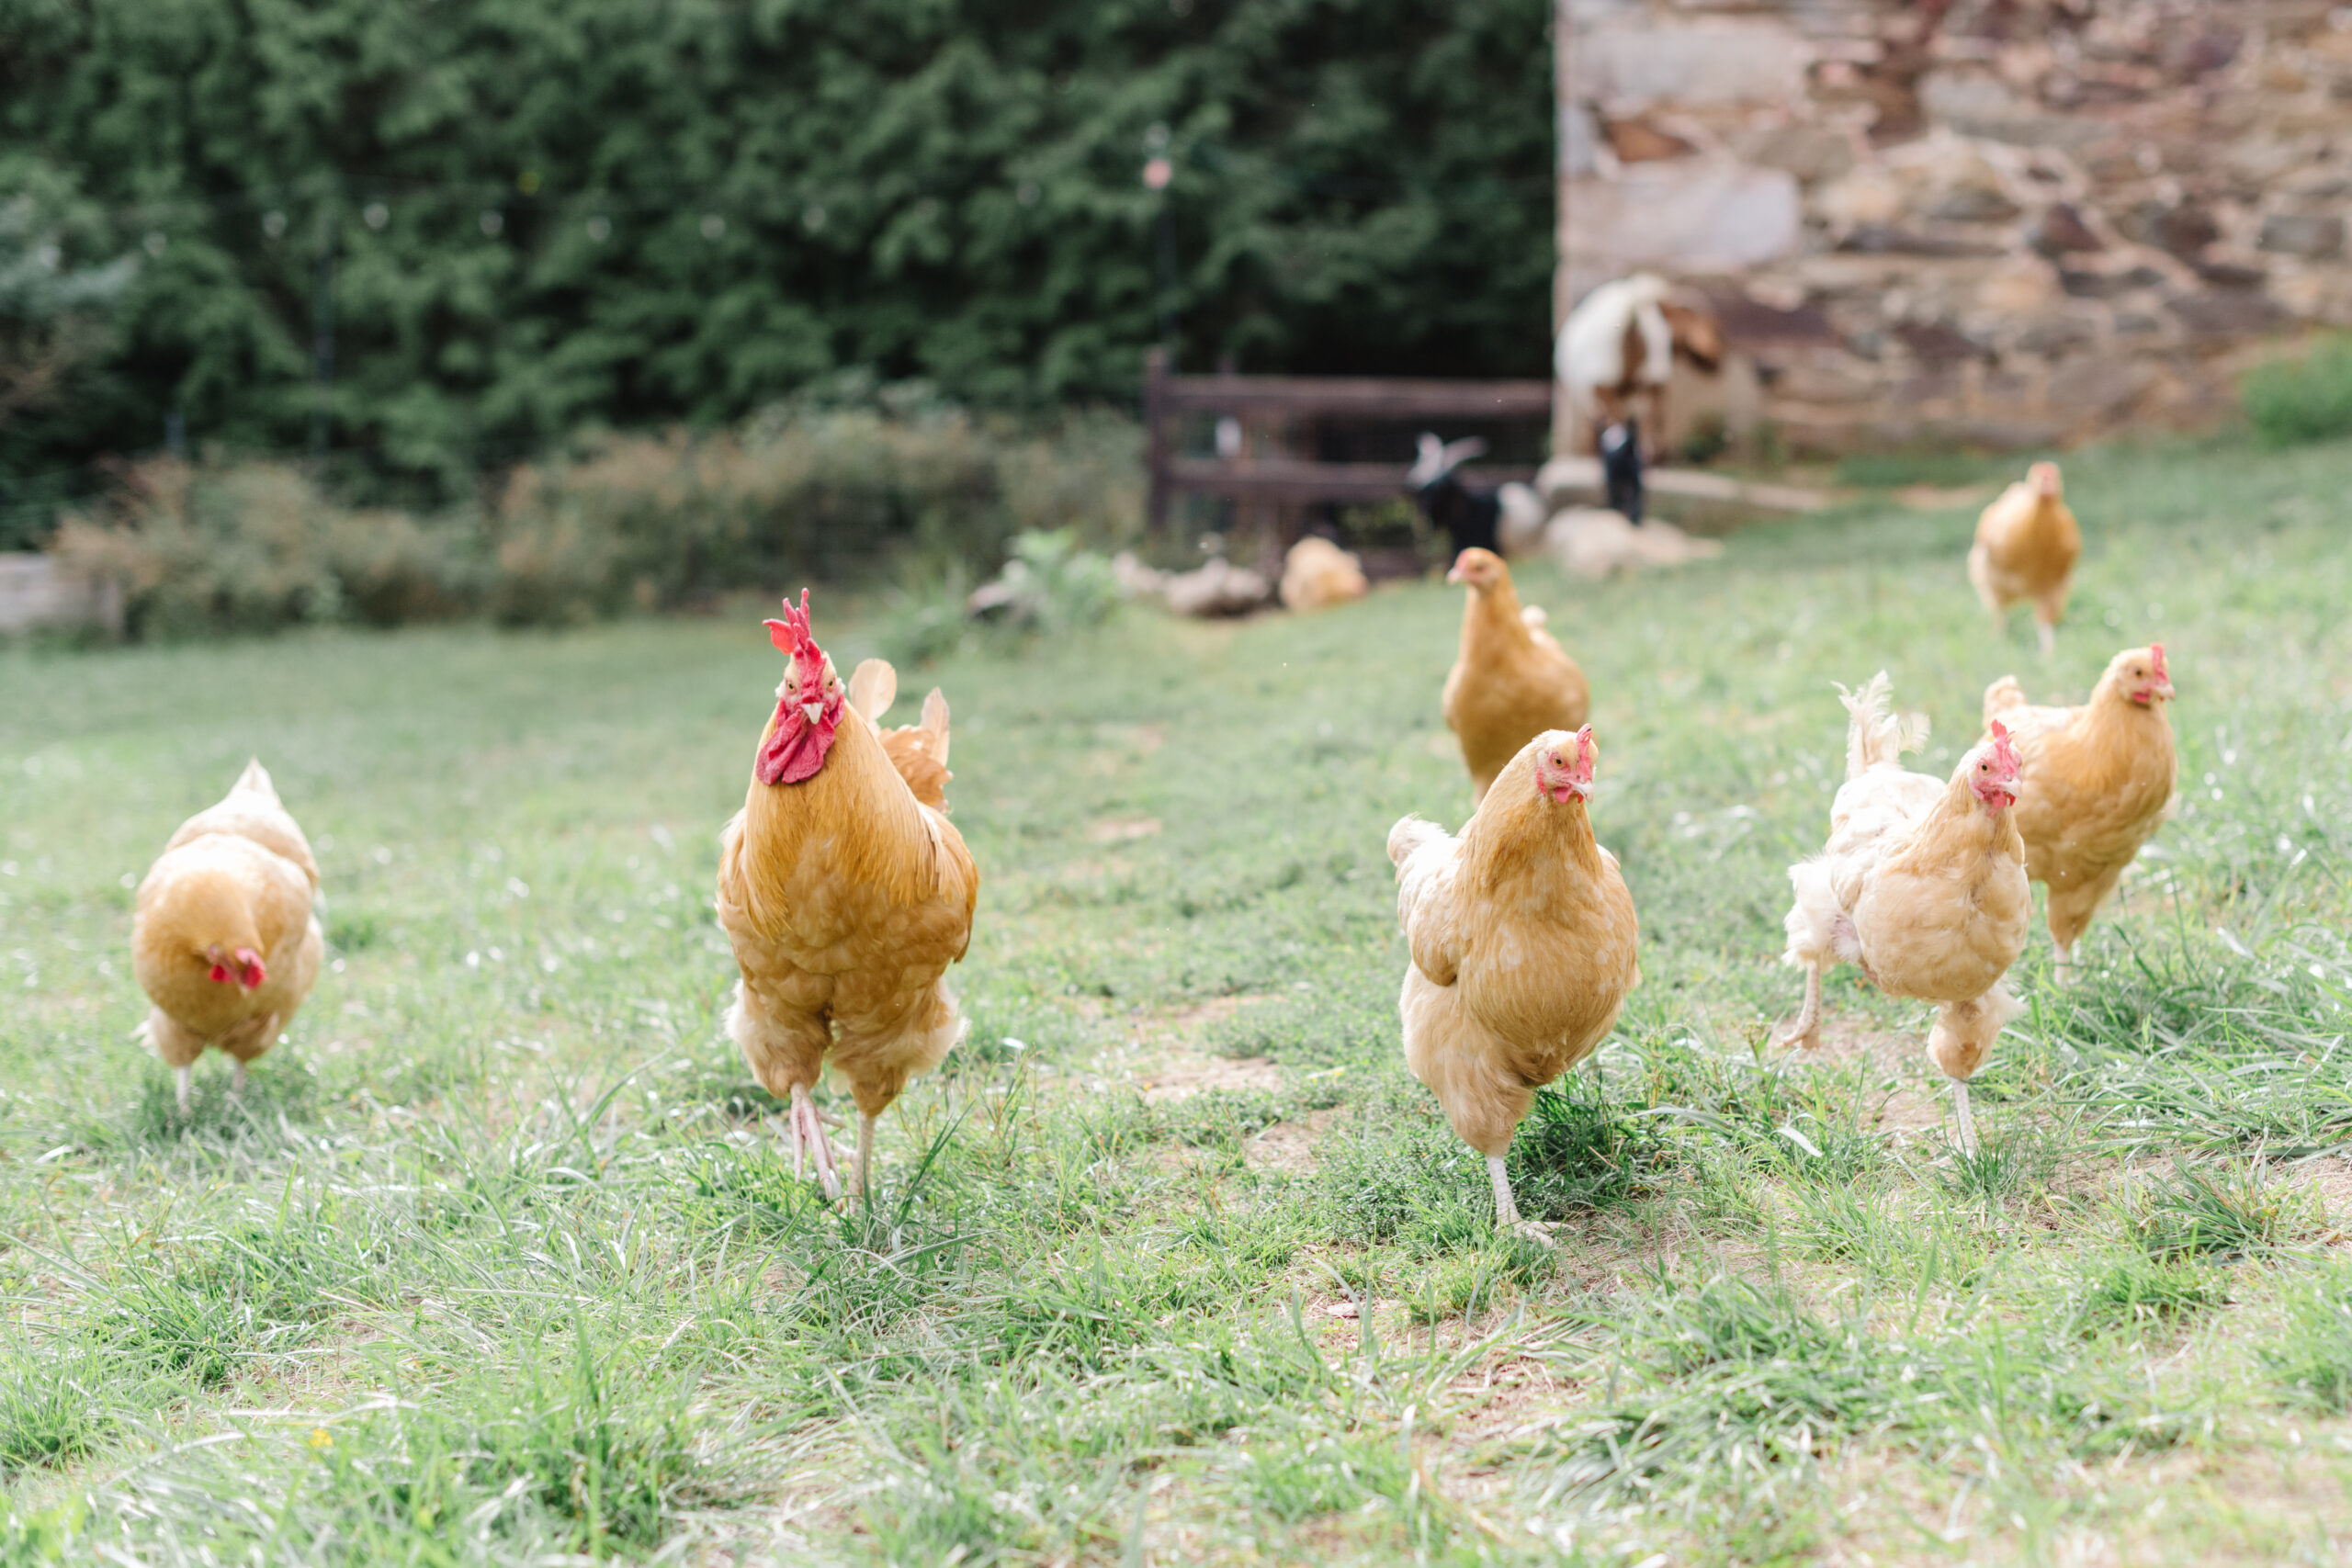 Chickens roam Ballenger Farm, a beautiful place for family photos in Northern Virginia